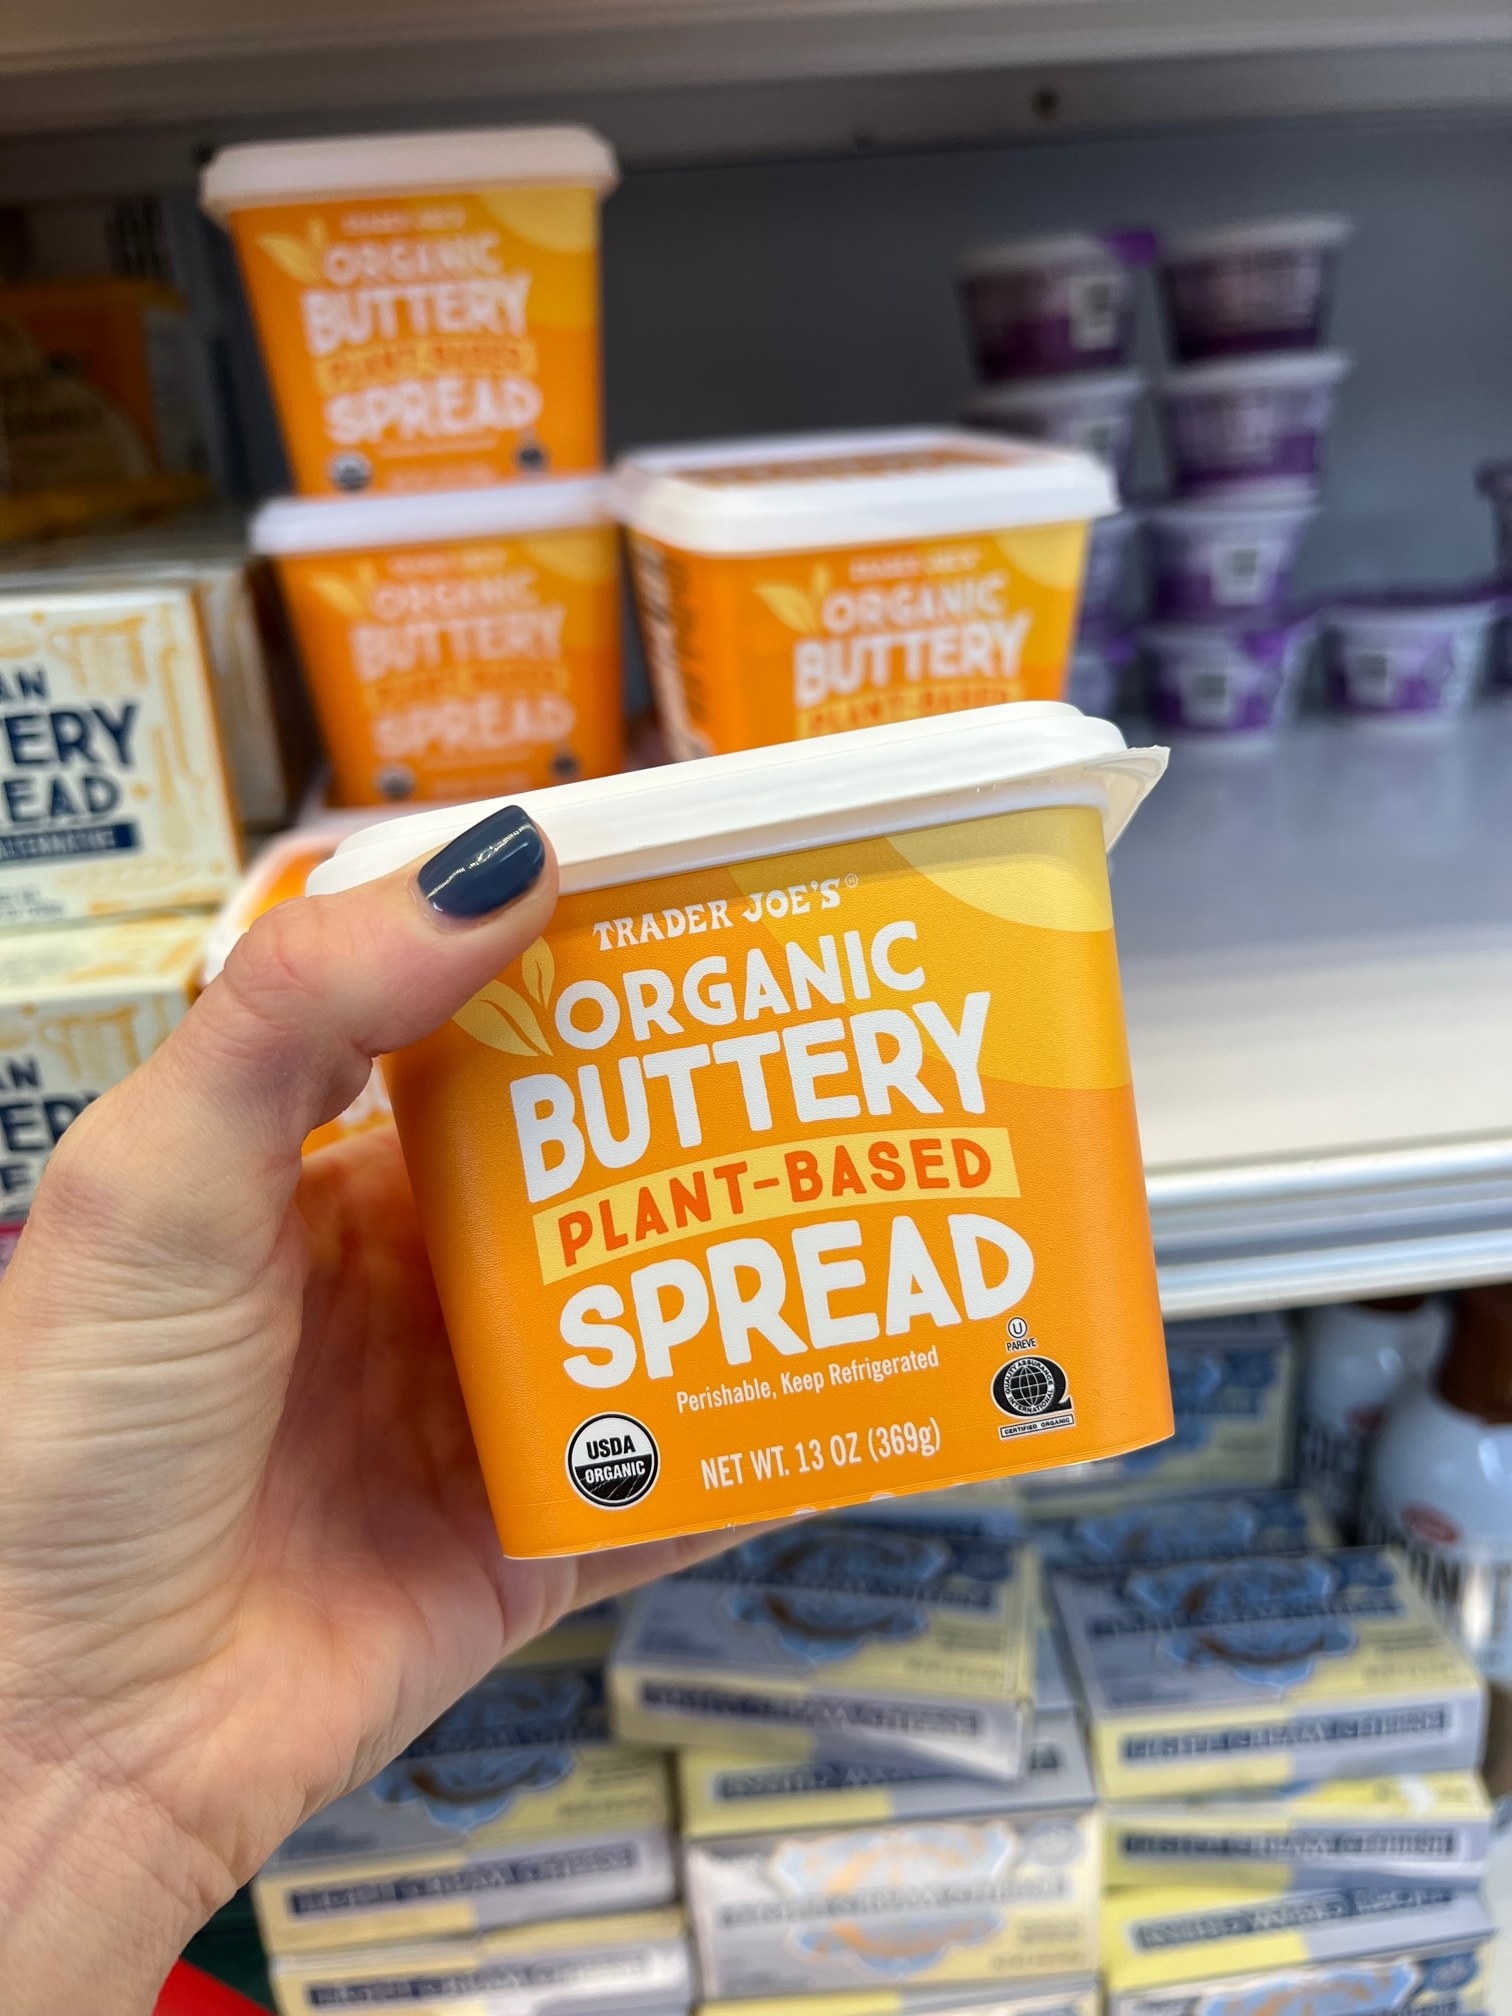 A tub of Organic Buttery Plant-Based Spread